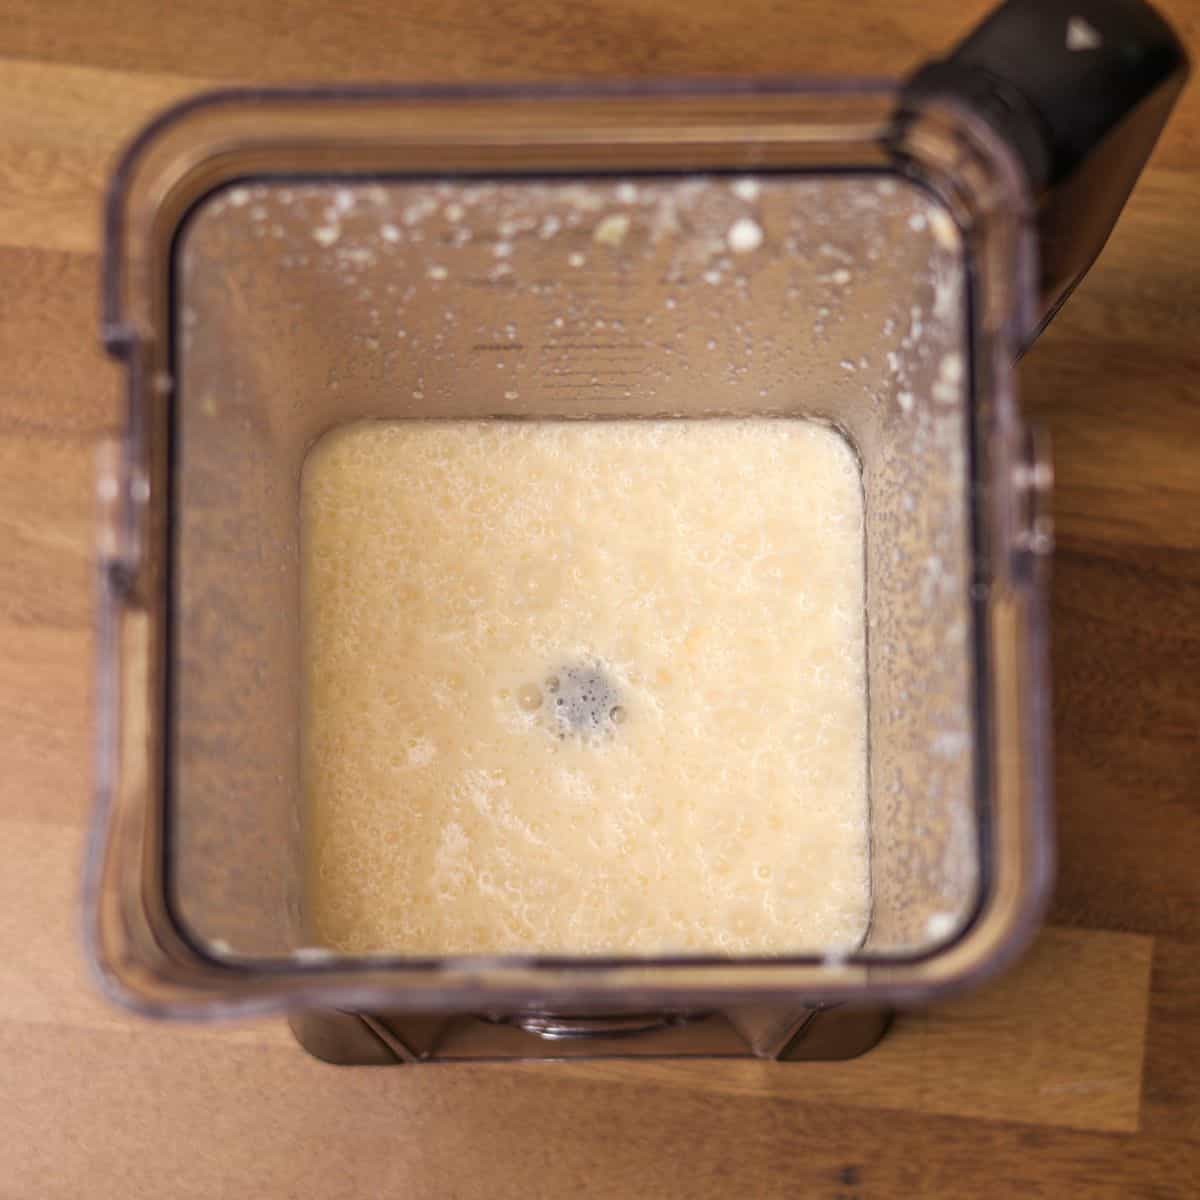 Top view of a blender filled with a frothy, pale yellow mixture of egg whites and other ingredients, ready to be poured.